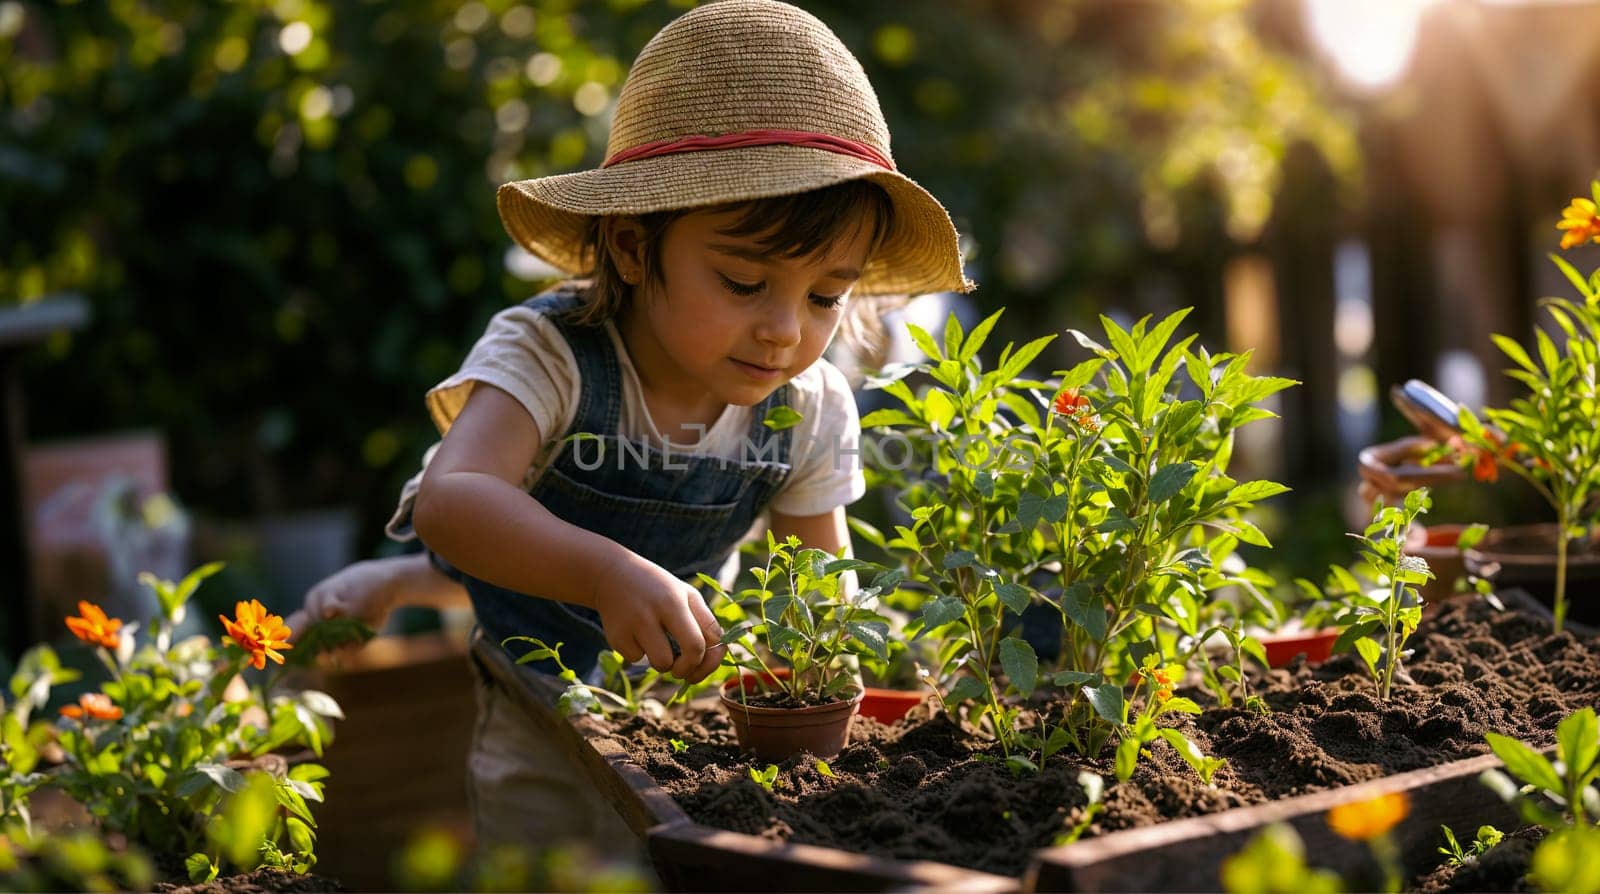 A child in a sunhat tenderly plants seedlings in a garden, embracing the joy of spring gardening by chrisroll